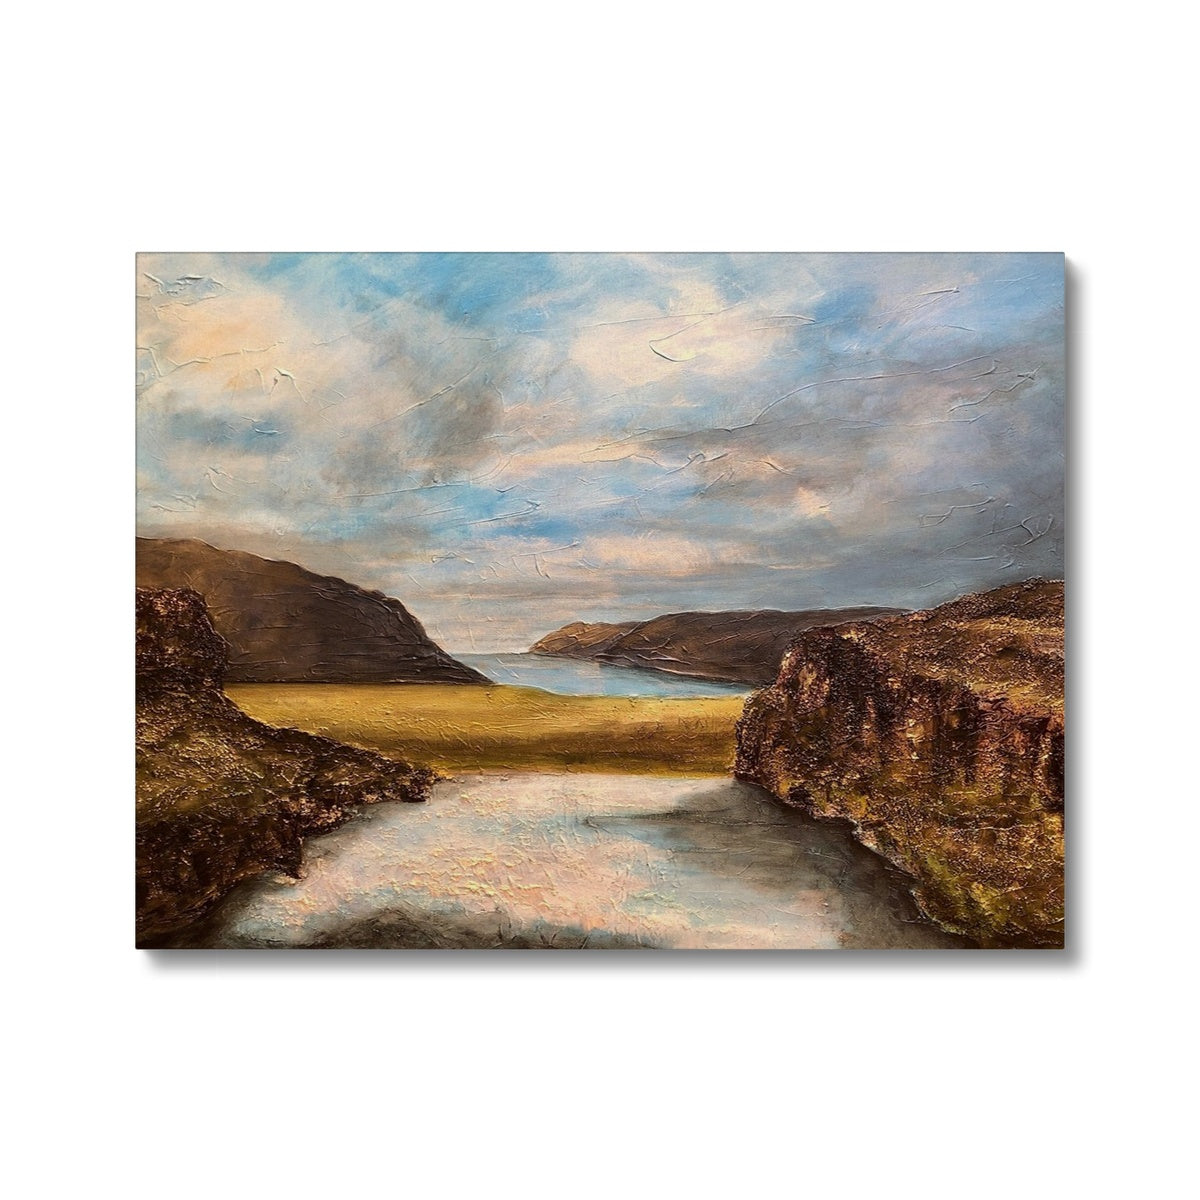 Westfjords Iceland Painting | Canvas From Scotland-Contemporary Stretched Canvas Prints-World Art Gallery-24"x18"-Paintings, Prints, Homeware, Art Gifts From Scotland By Scottish Artist Kevin Hunter